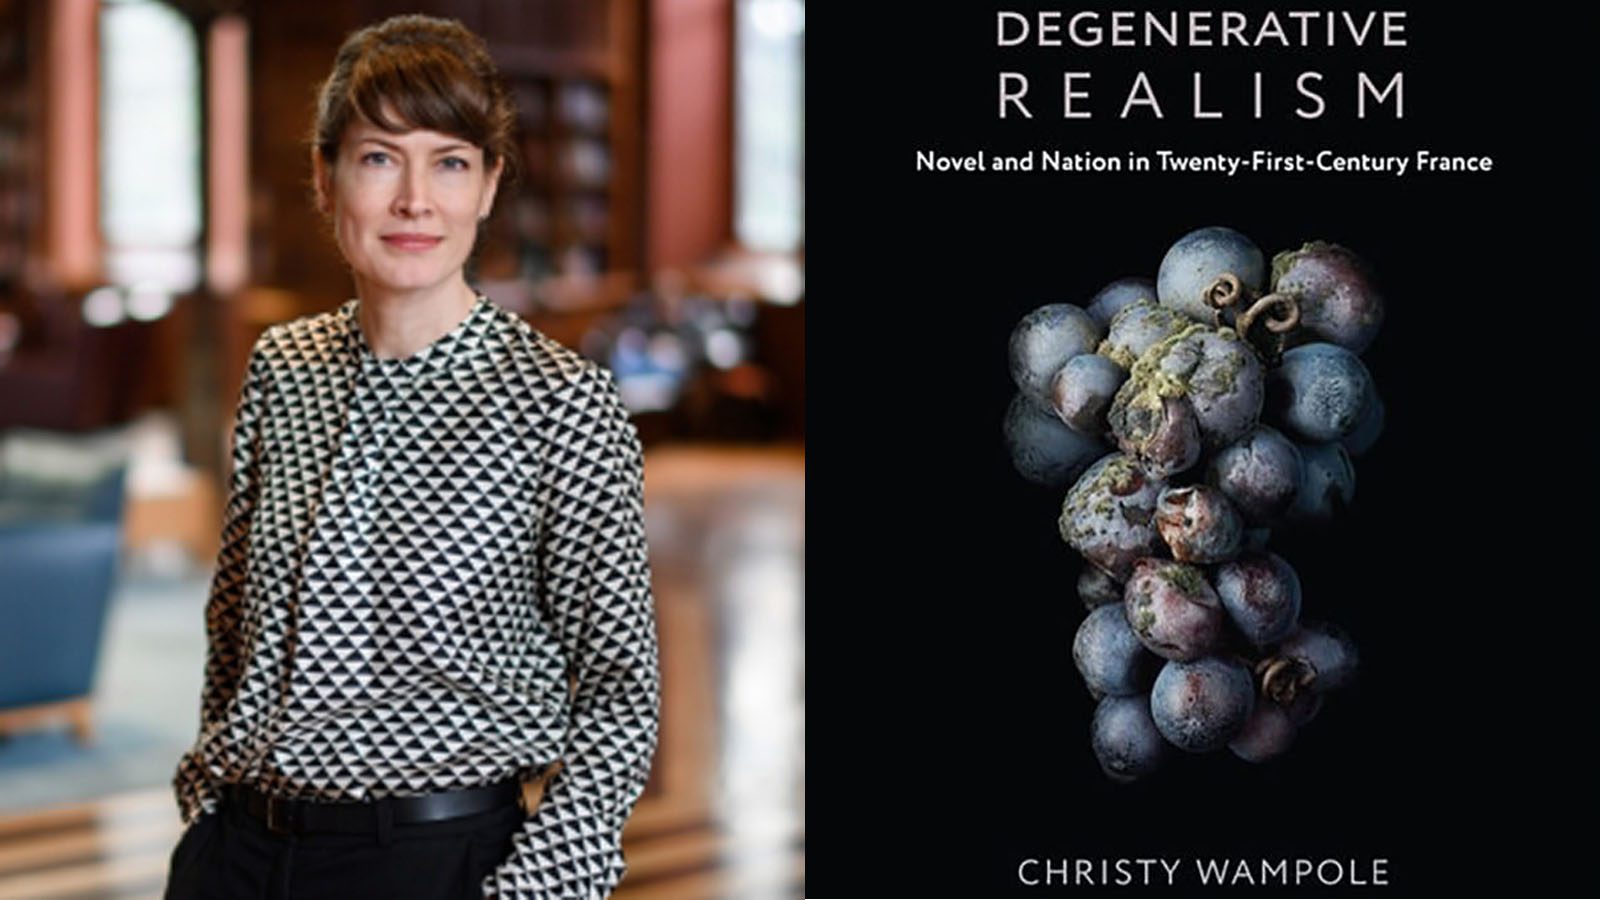 Christy Wampole and the book cover for Degenerative Realism